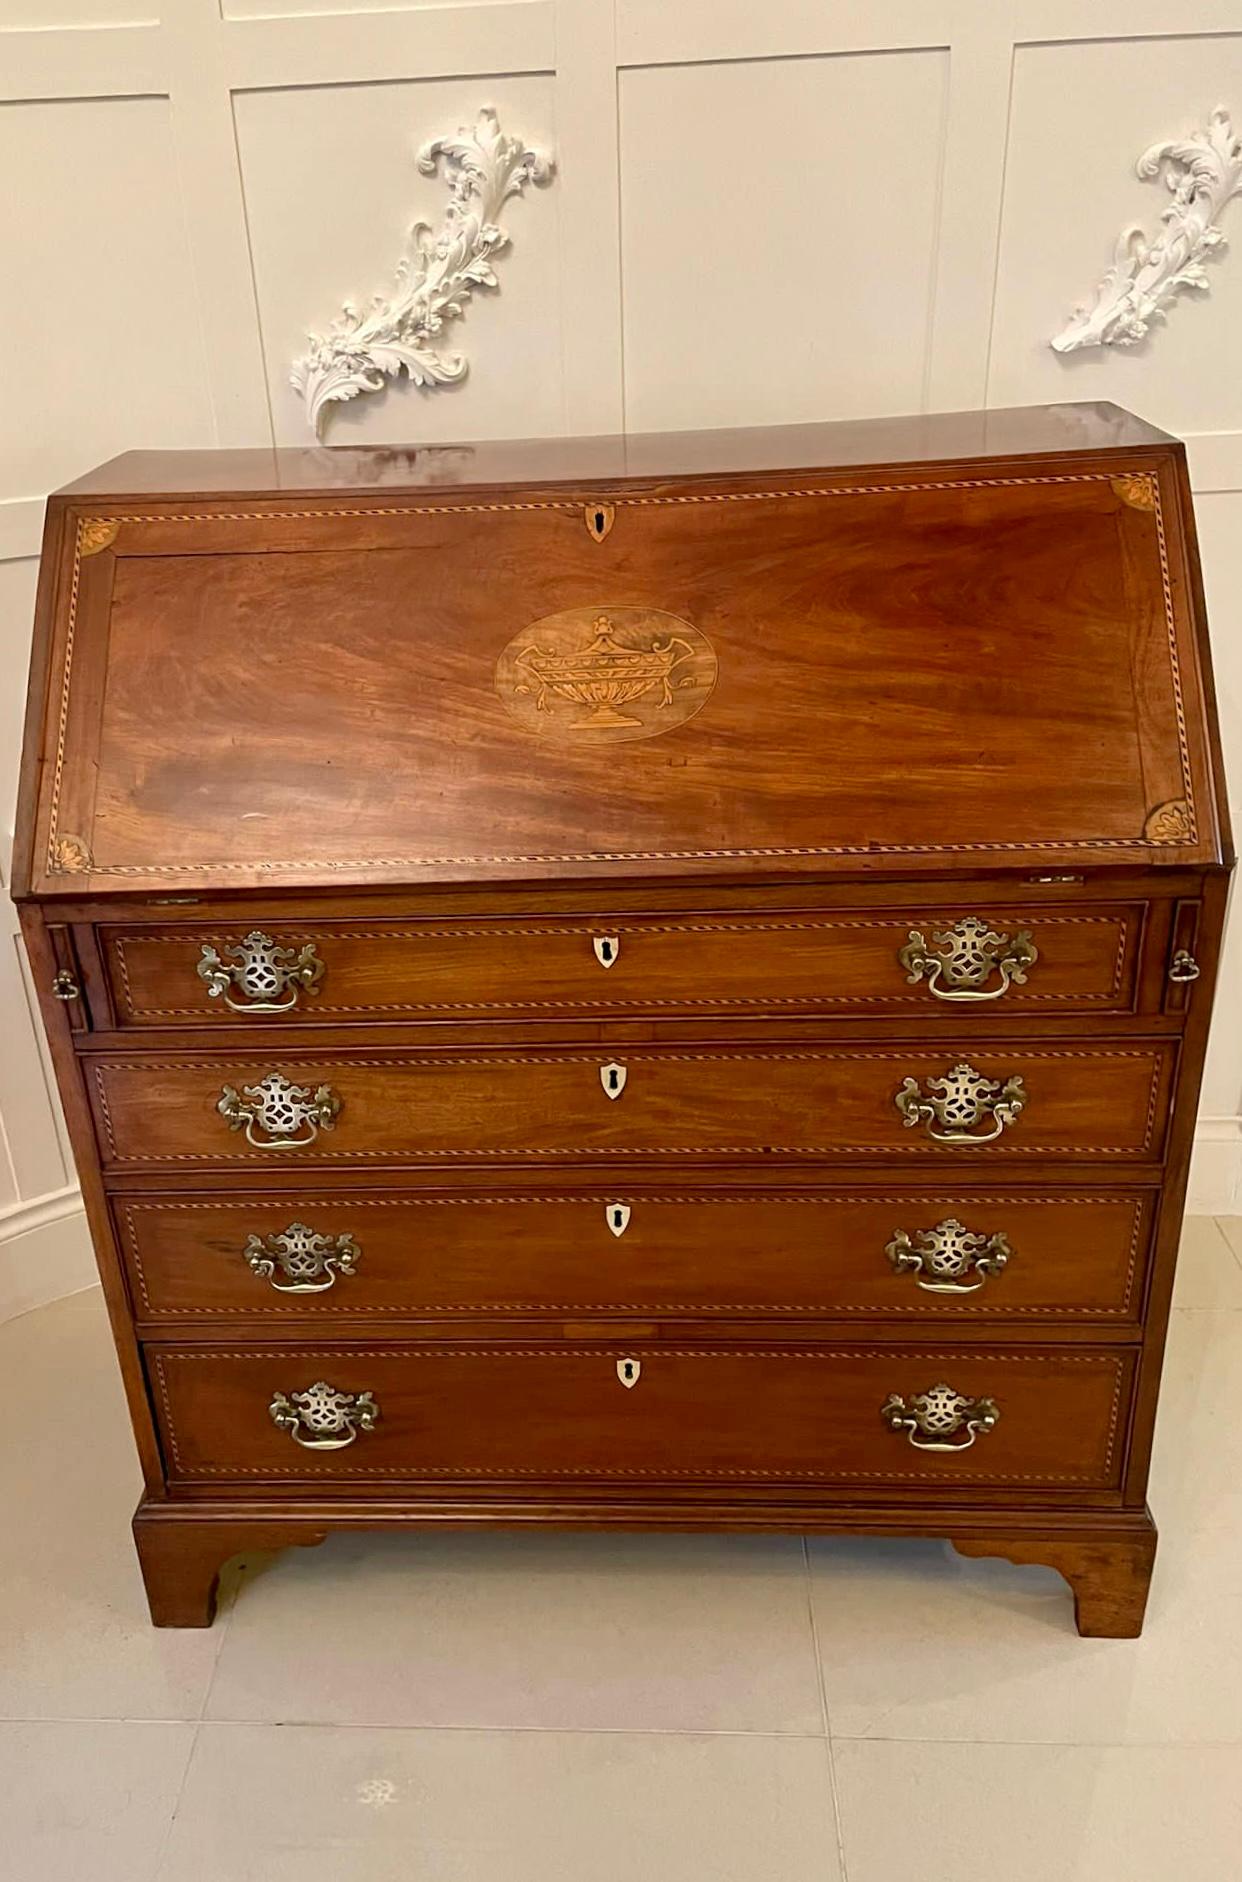 Quality antique George III mahogany inlaid bureau having a quality inlaid fall with very attractive ebony and boxwood stringing and four inlaid shells to the corners with an inlaid satinwood urn to the centre. The fall opens to reveal a green baize